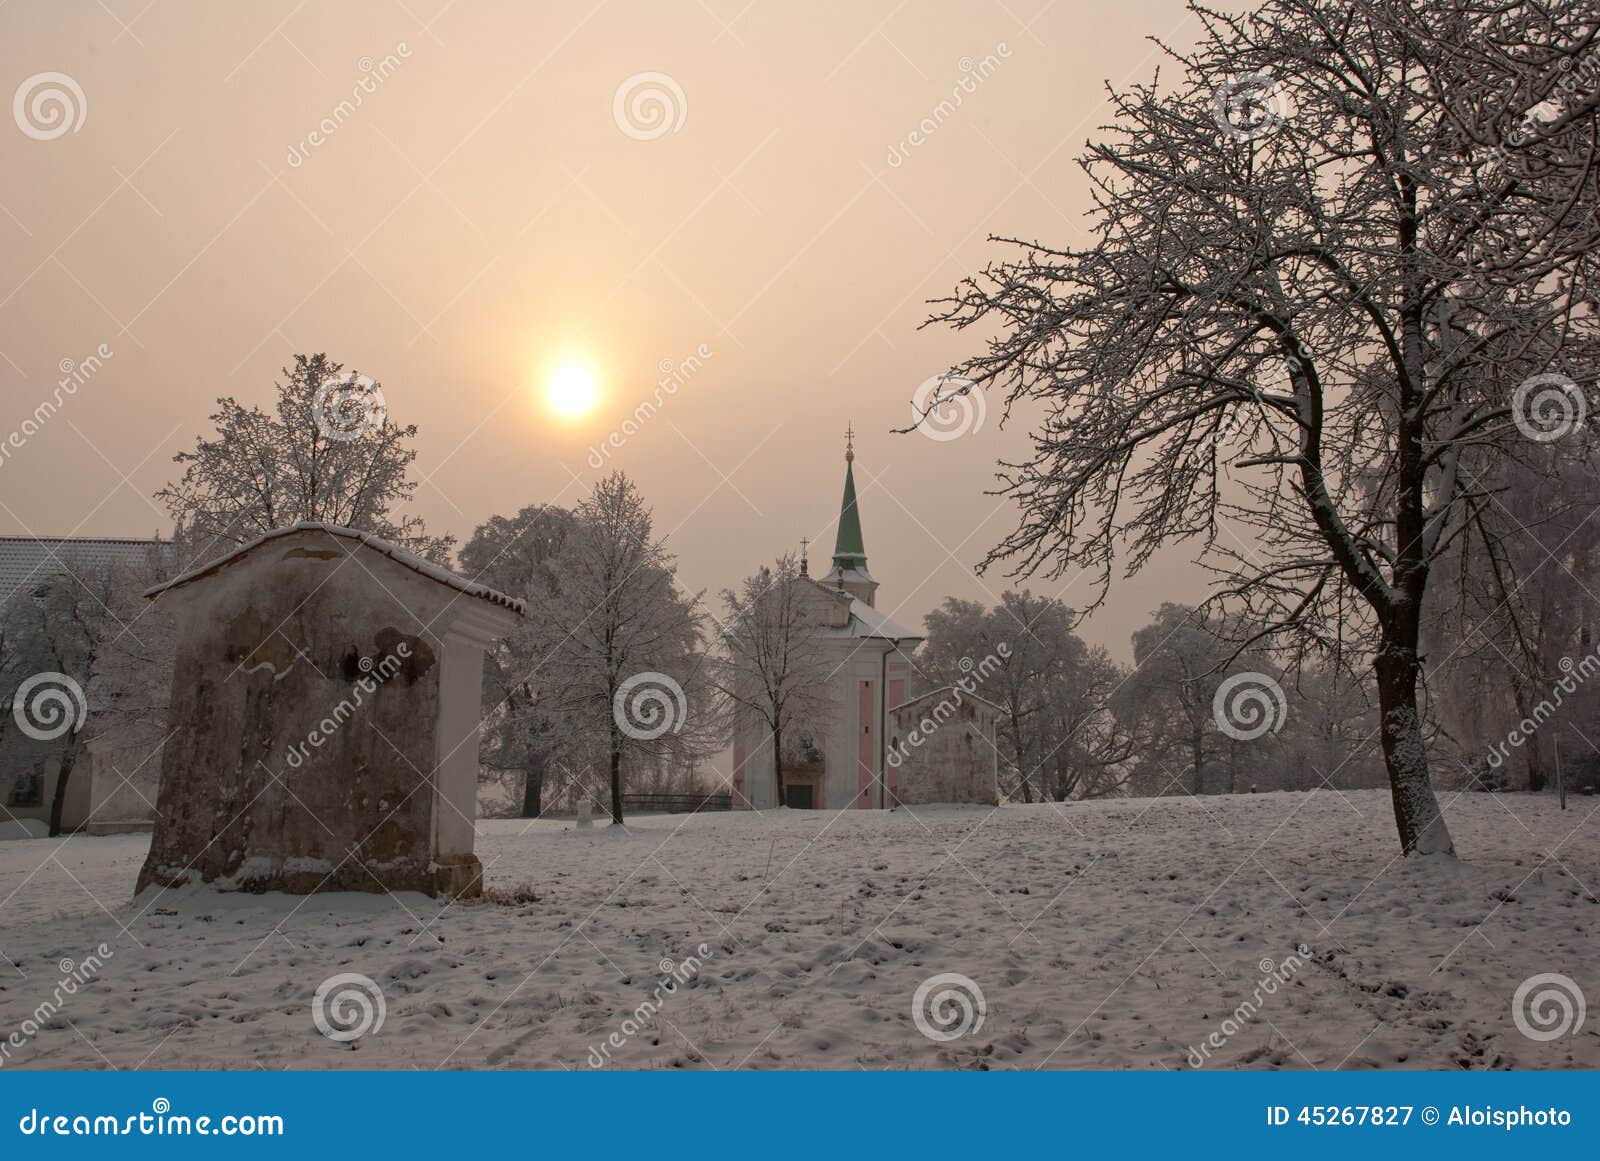 pilgrimage place by winter morning